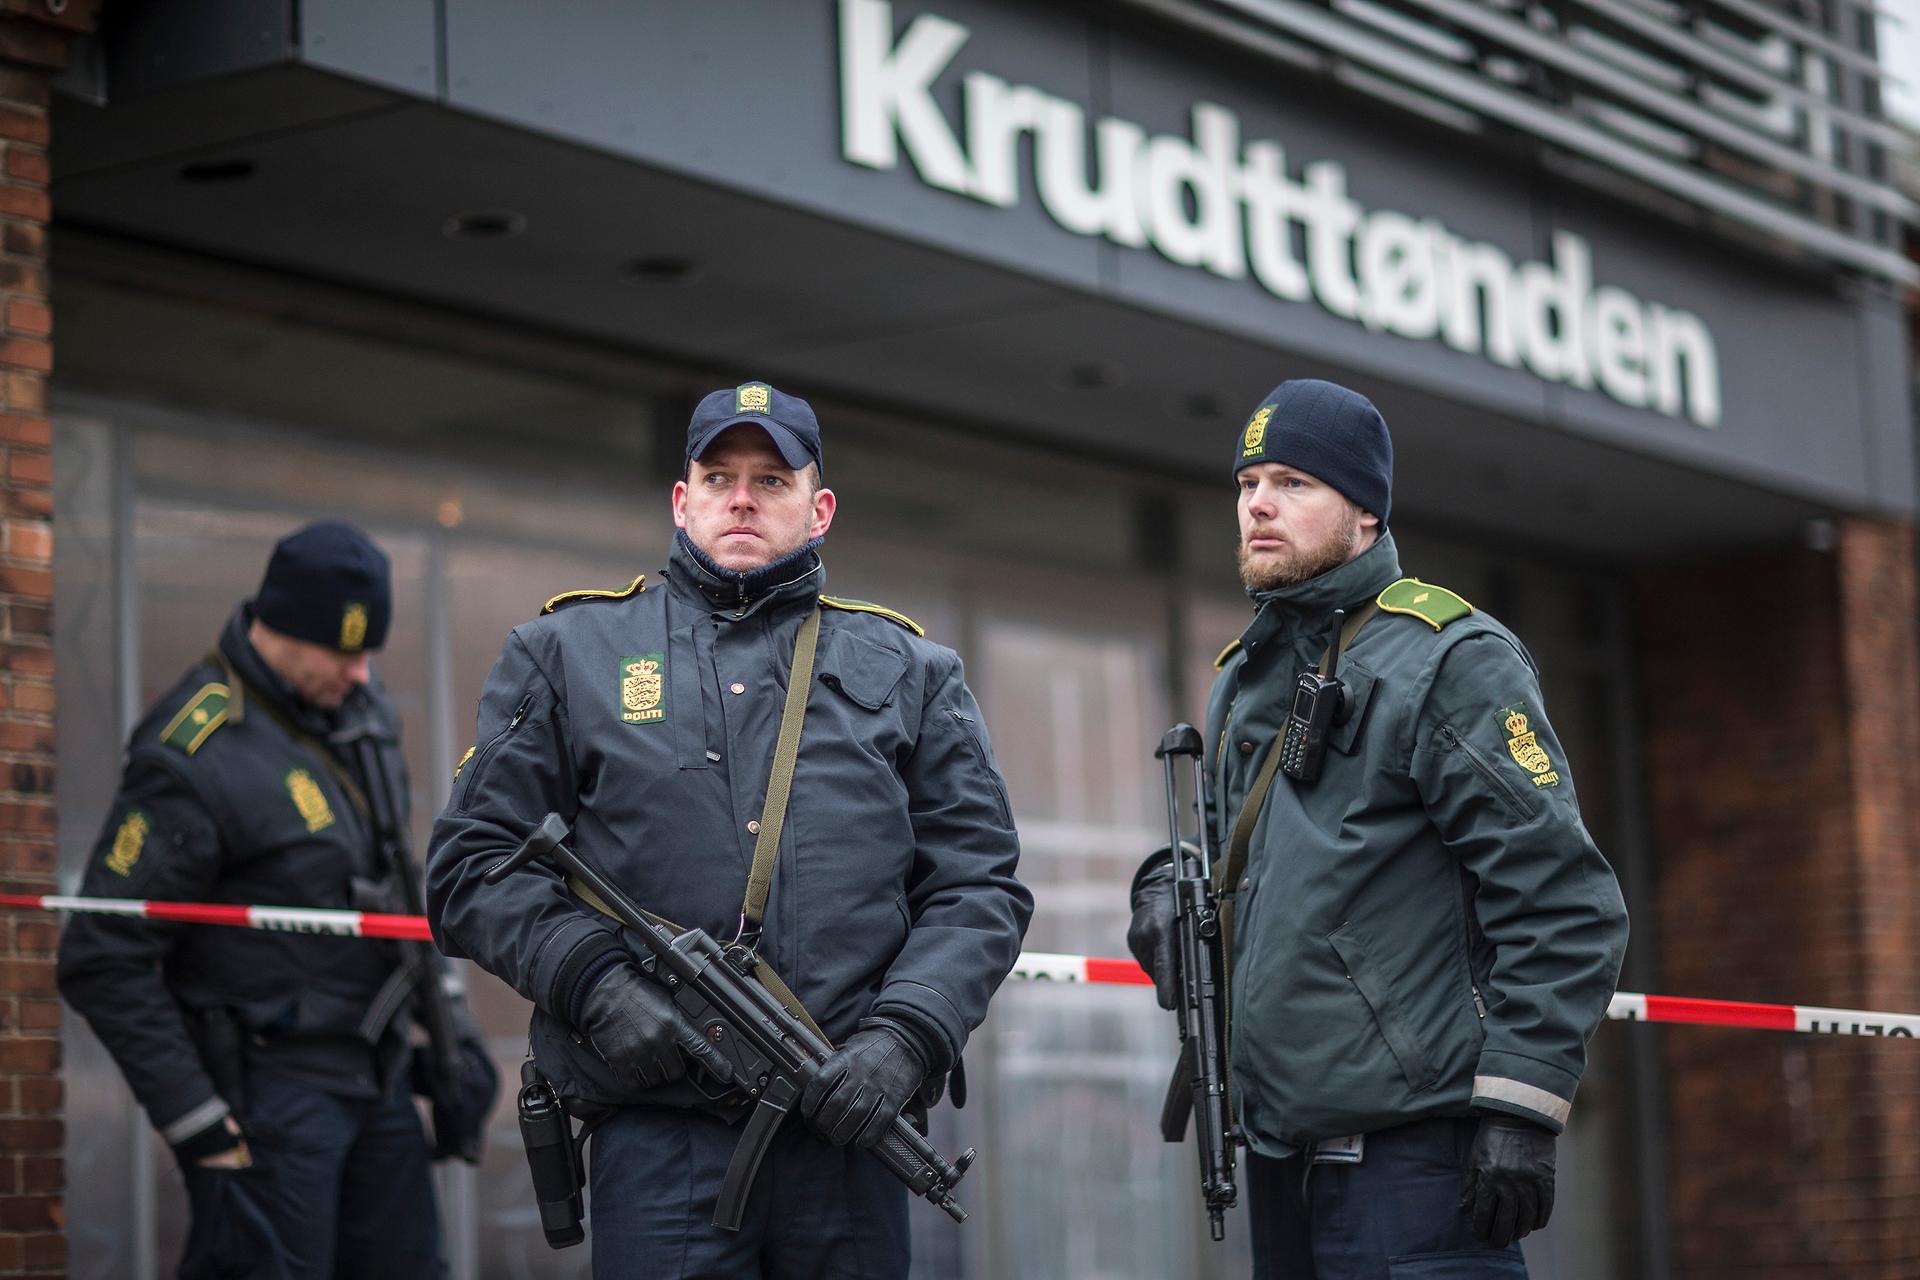 Police guard the scene of a shooting at cafe 'Krudttonden,' which was hosting a free speech event, in Copenhagen on Monday.